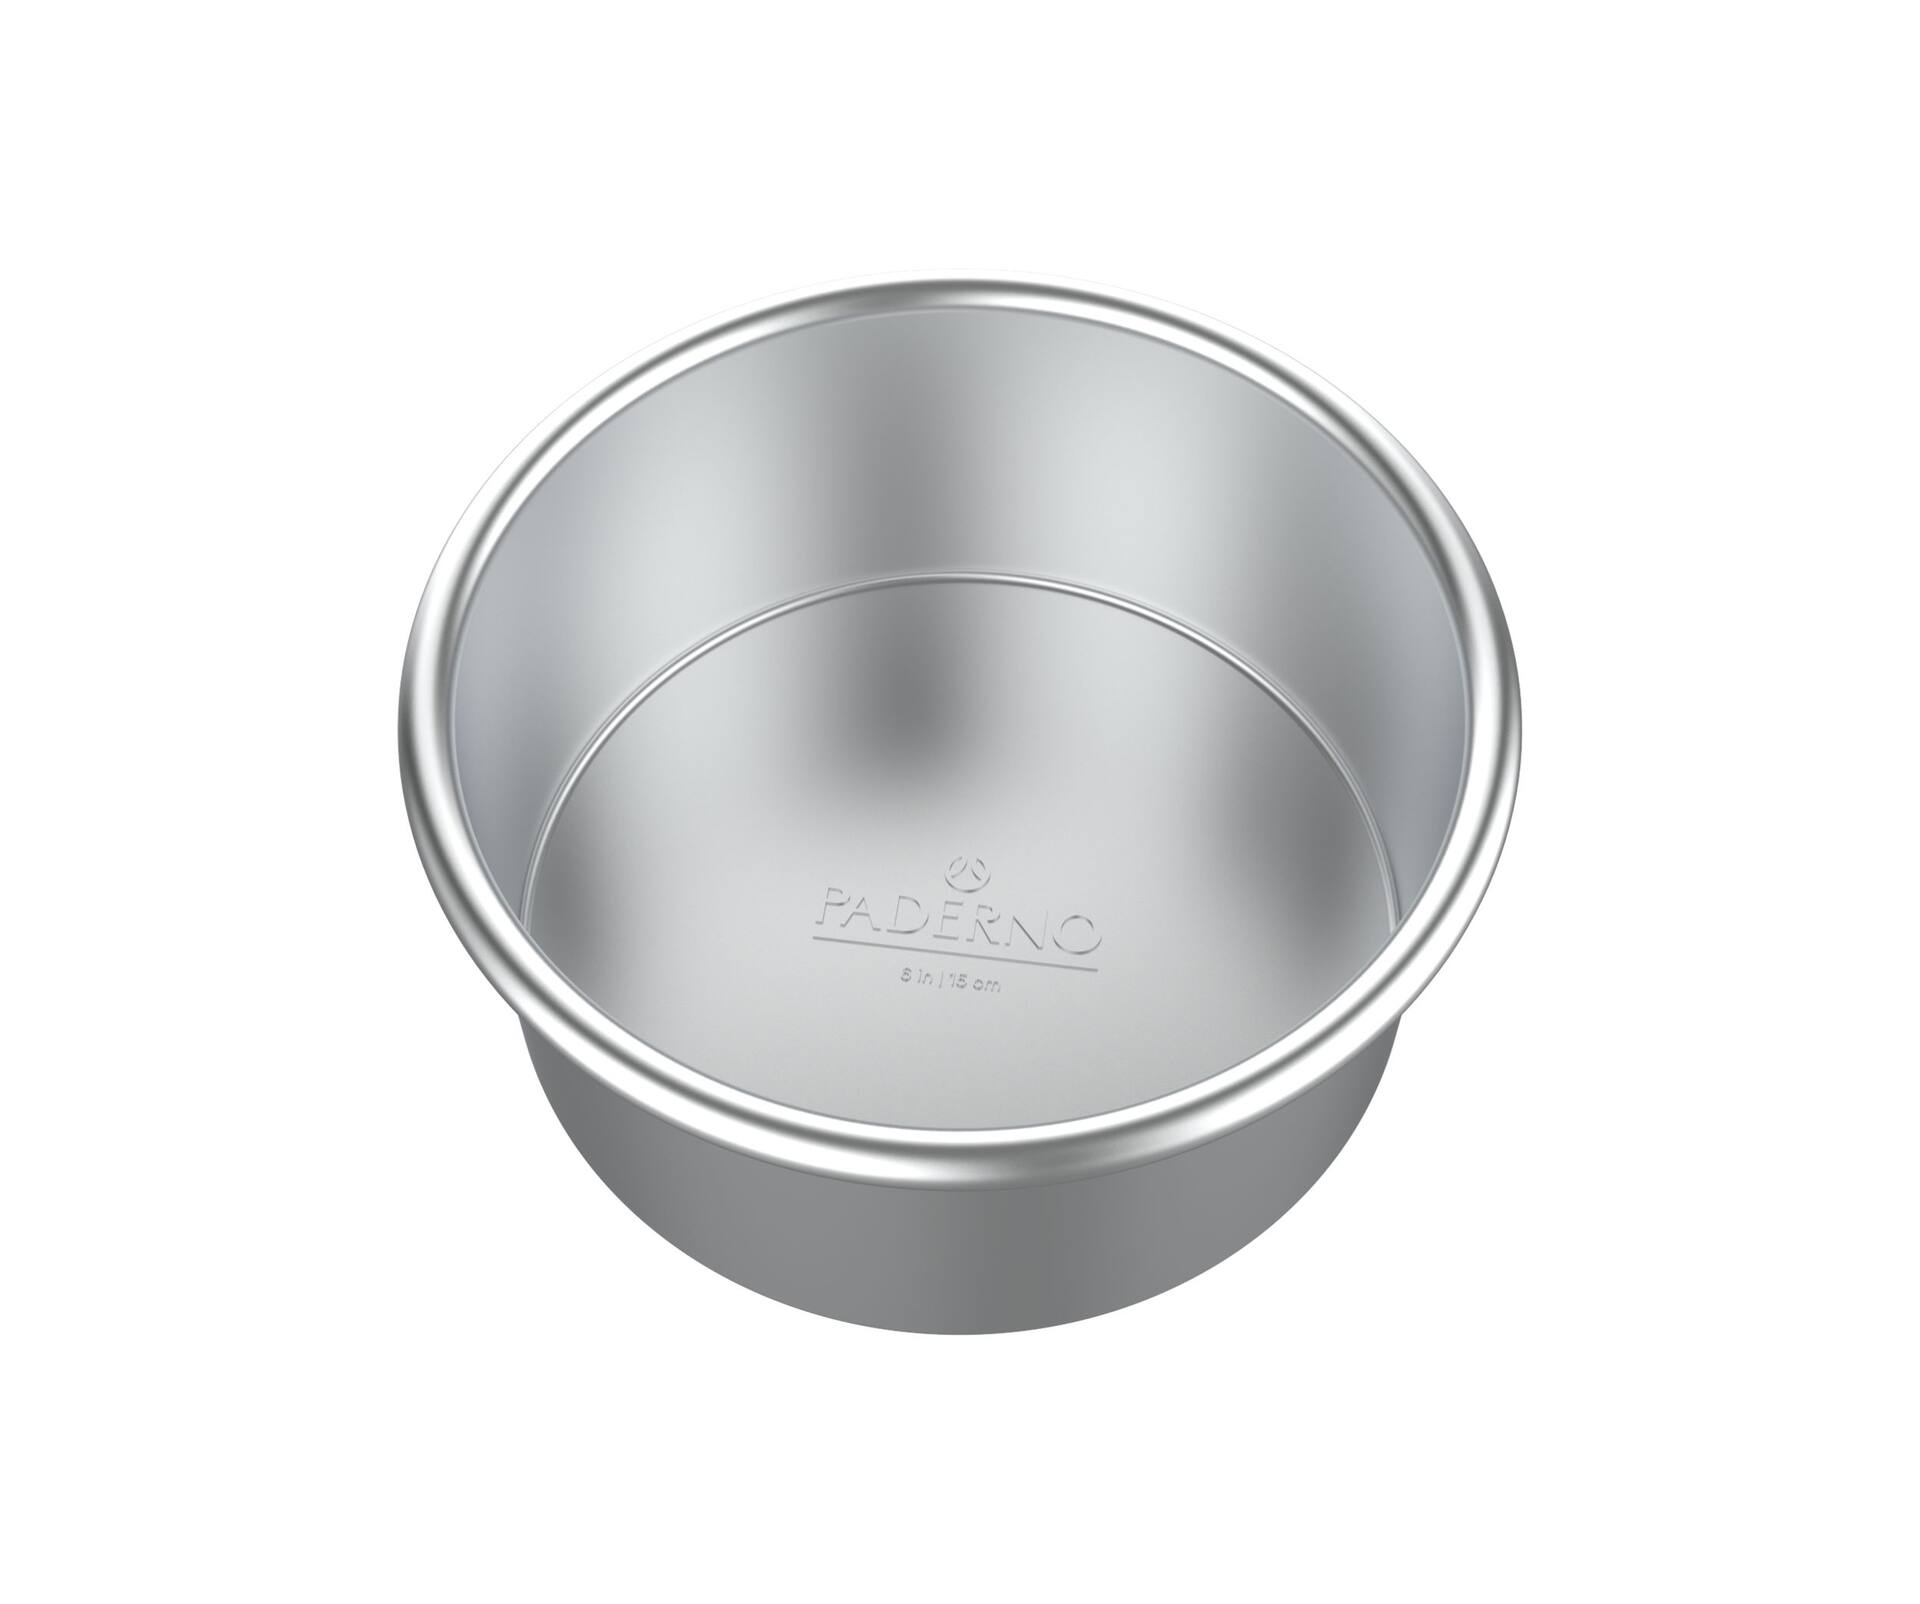 MASTER Chef Round Cake Pan, 9-in | Canadian Tire